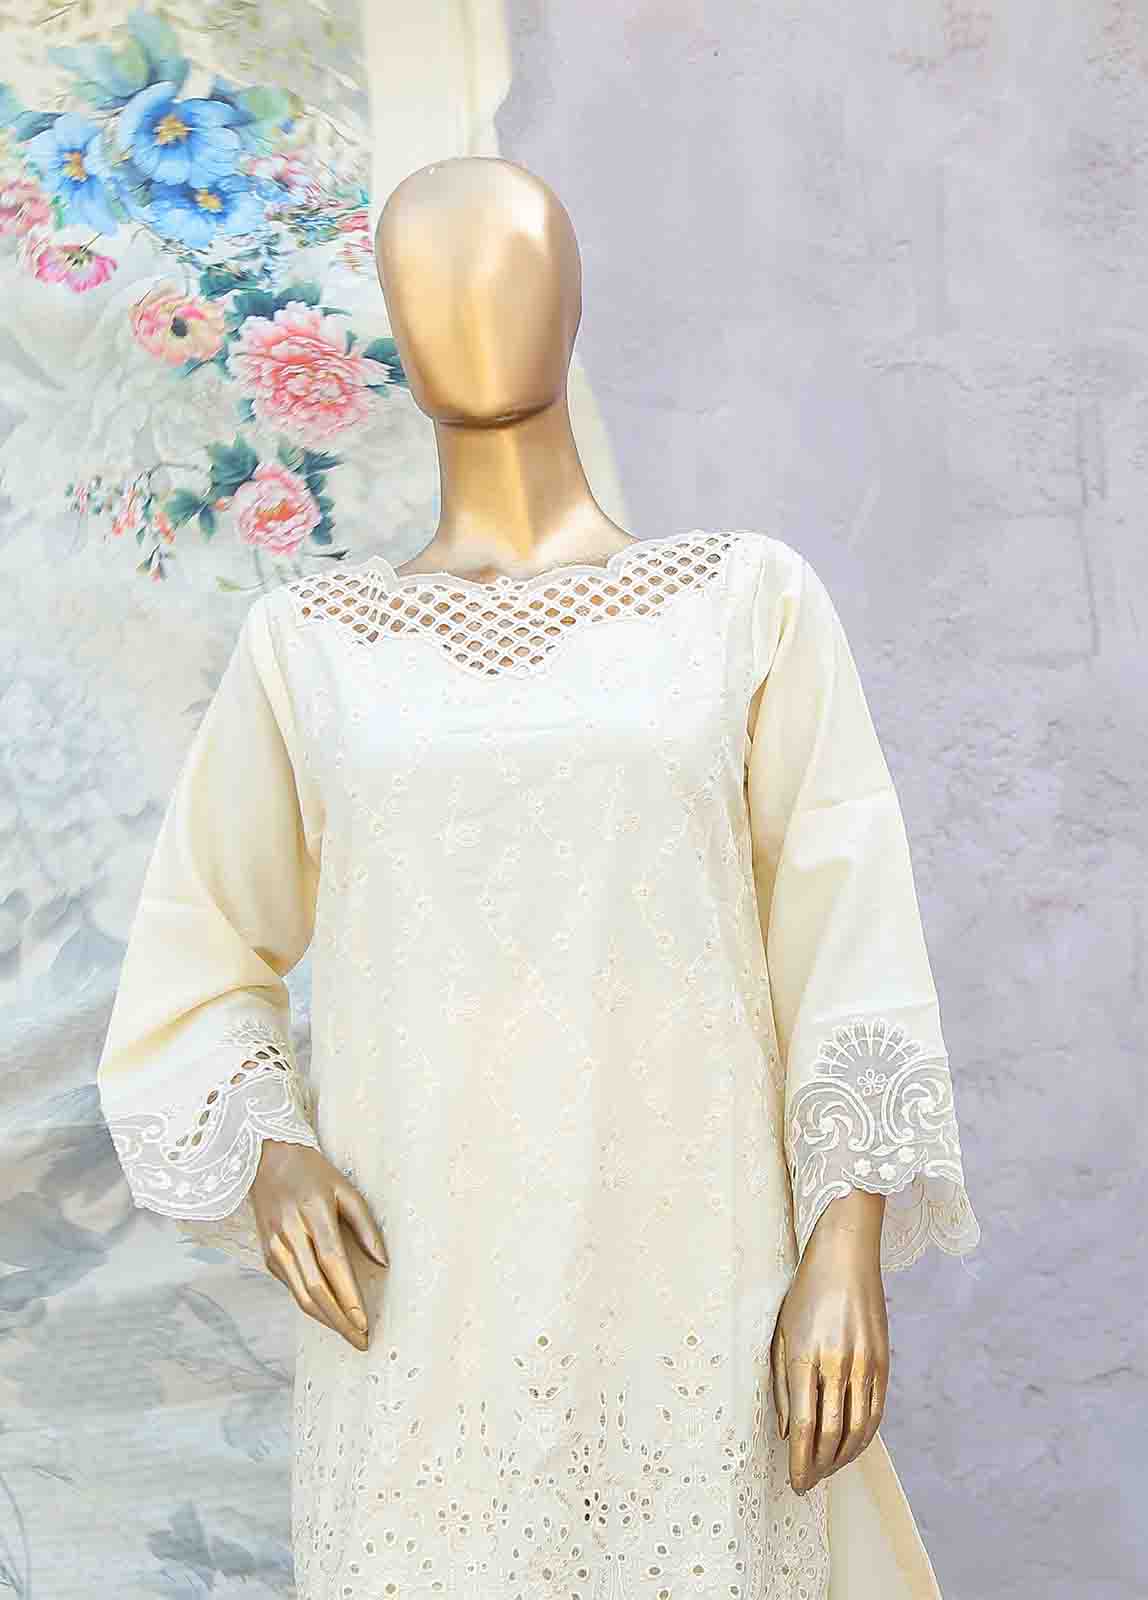 SMB-021-3 Piece Linen Embroidered collection